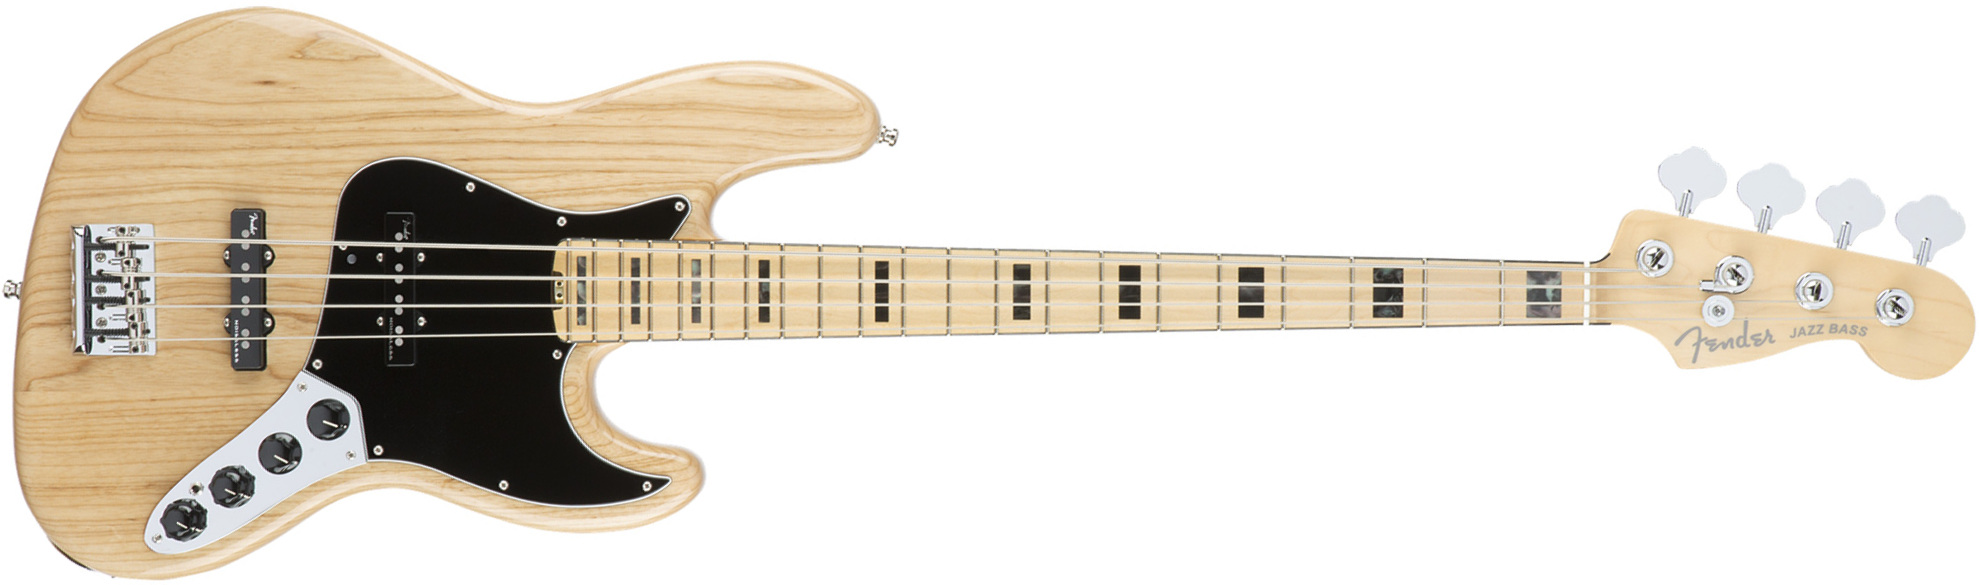 Fender Jazz Bass American Elite Ash 2016 (usa, Mn) - Natural - Solid body electric bass - Main picture